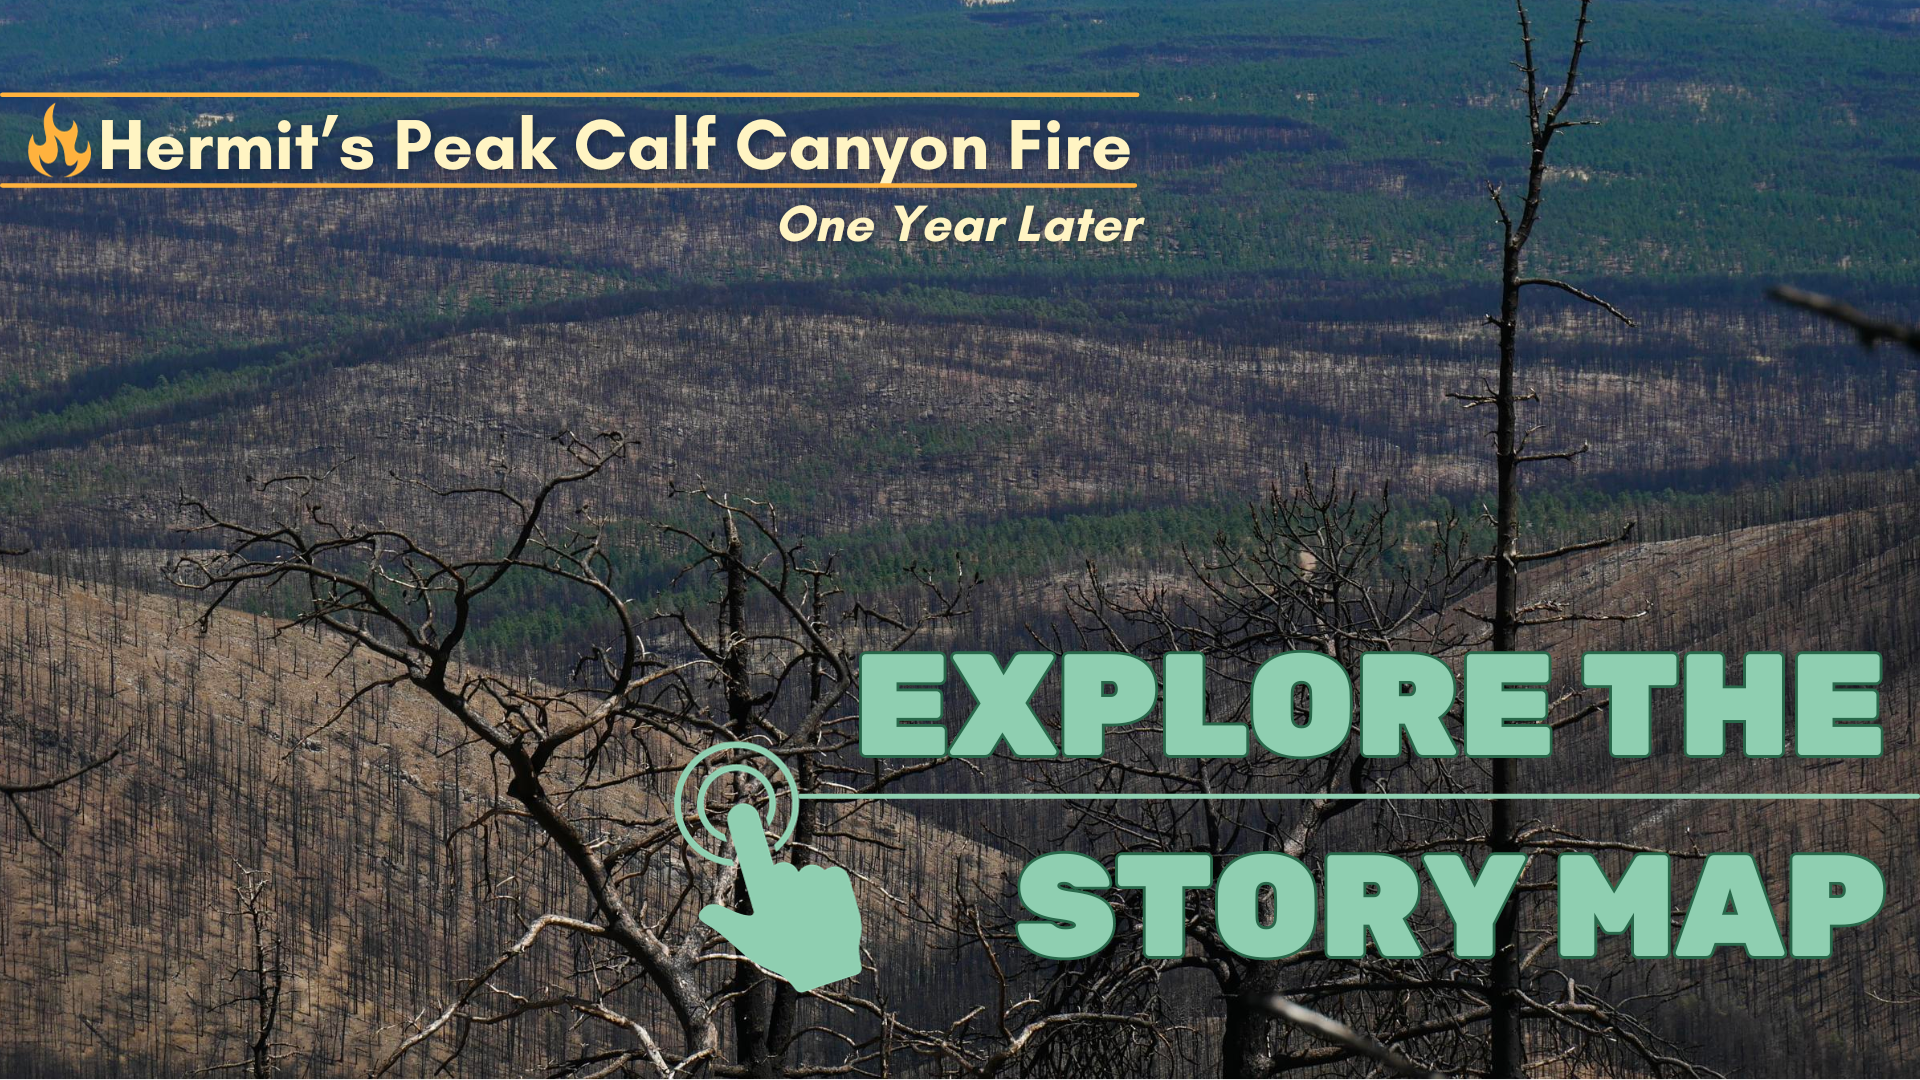 Image Text reads: "Hermit's Peak Calf Canyon Fire: One Year Later" and "Explore the Story Map" with a clickable link. The image shows a partial view of the burn footprint of the Hermit's Peak Calf Canyon Fire taken one year later. There are burned trees in the foreground and some patches of green trees in the background. 